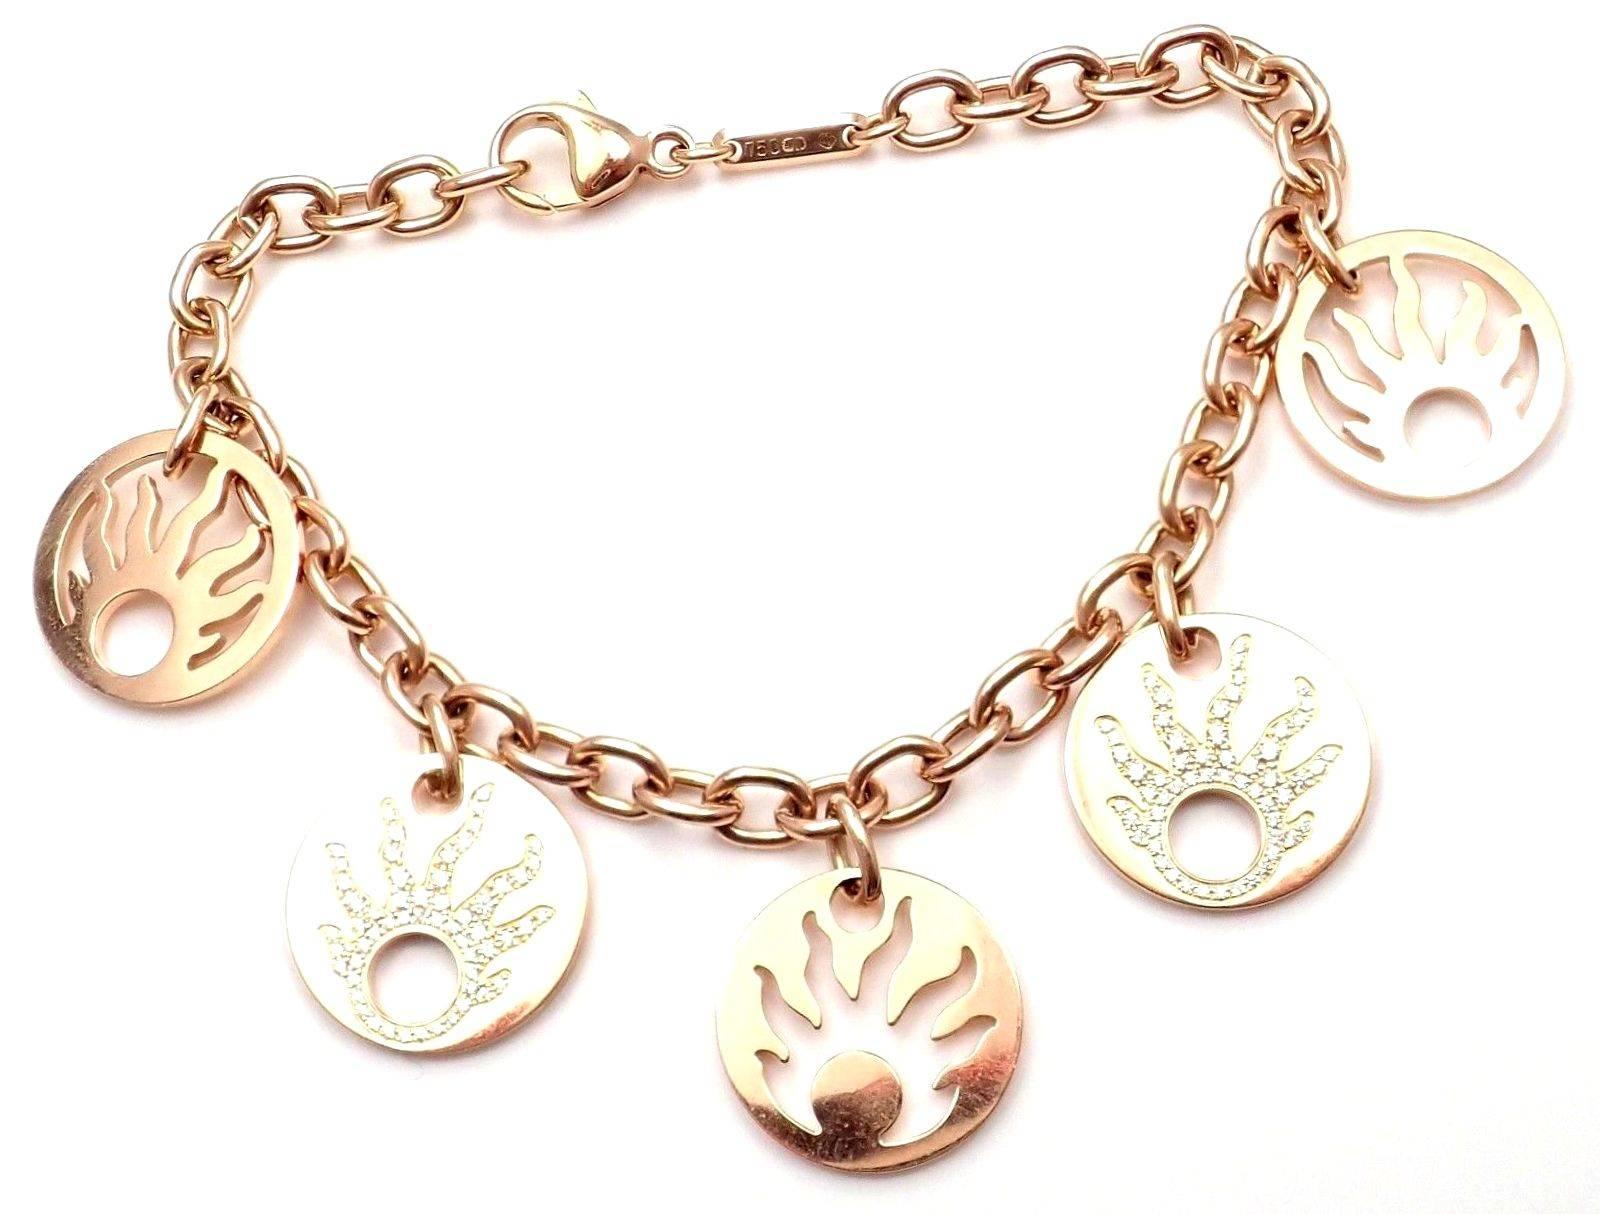 18k Rose Gold Happy Sun Diamond 5 Charms Link Bracelet by Chopard. 
With 120 round brilliant cut diamonds VS1 clarity, G color total weight approx. 1.20ct
Details: 
Length: 7.25 inches
Width: 5mm chain
Weight: 26.9 grams
Stamped Hallmarks: Chopard